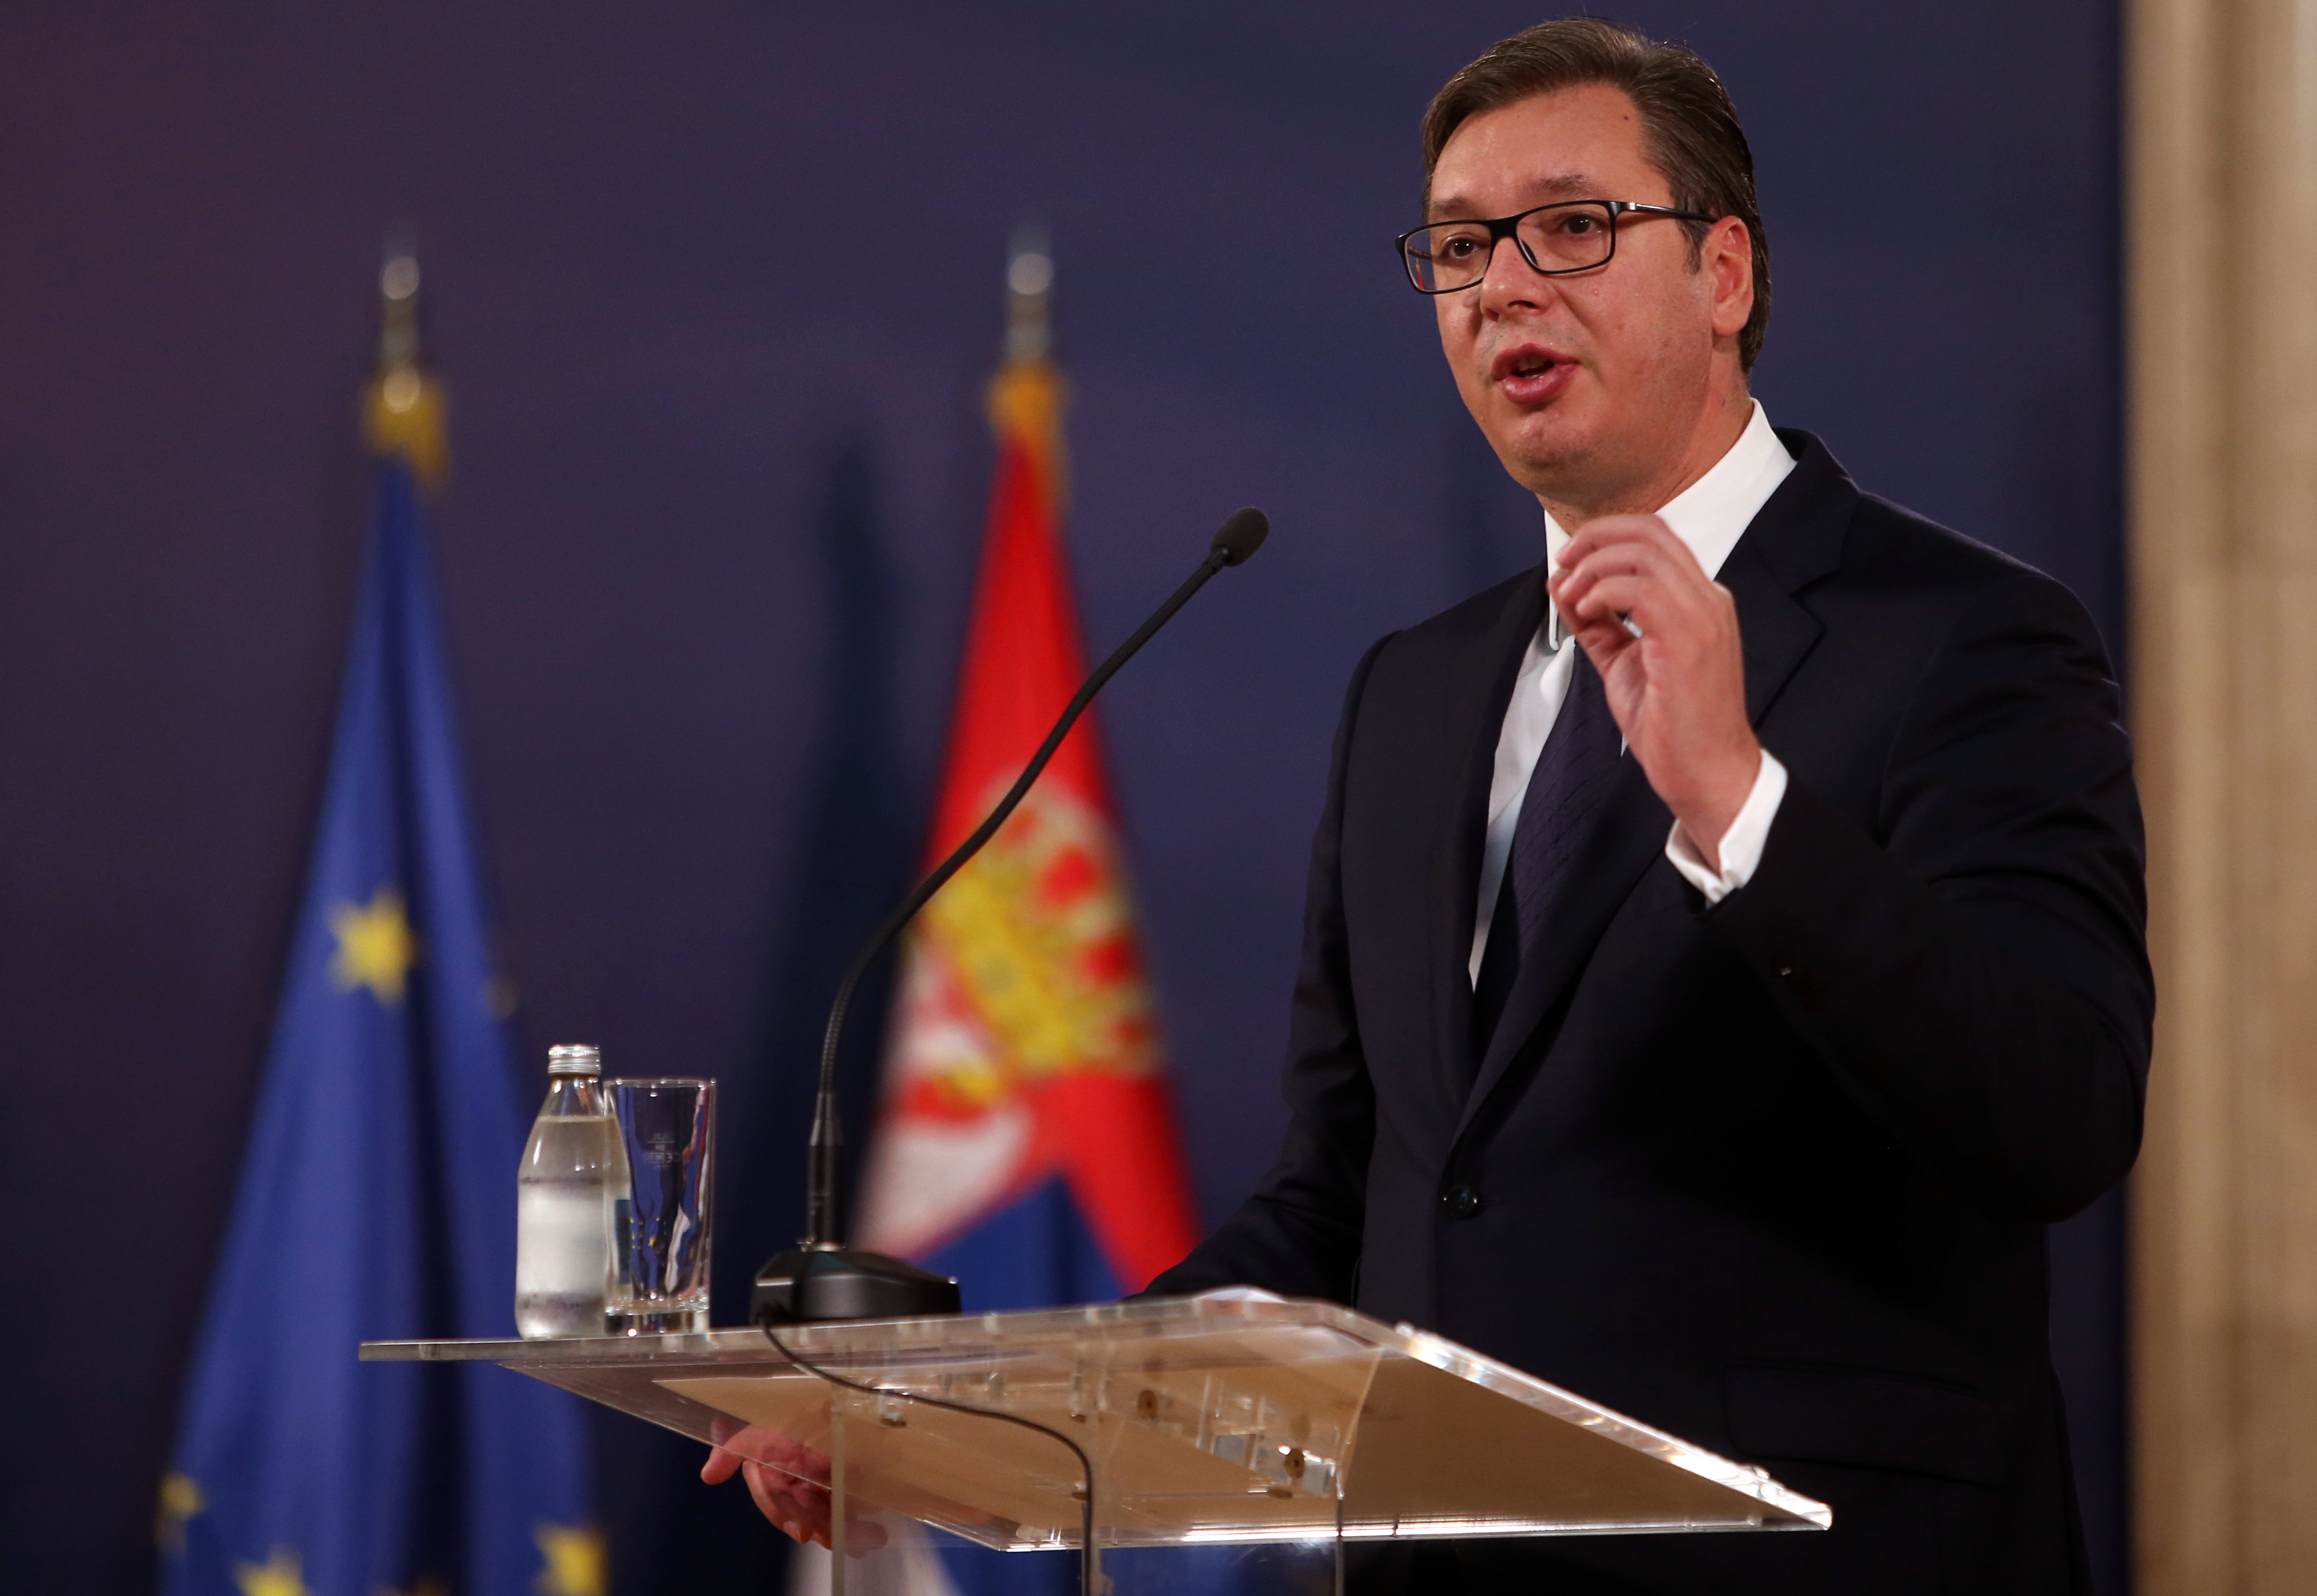 epa06932150 Serbian President Aleksandar Vucic talks during the press conference in Belgrade, Serbia, 07 August 2018. Vucic held a press conference answering questions on Serbia Kosovo relations, recent tensions, status of negotiations and general region stability.  EPA/ANDREJ CUKIC